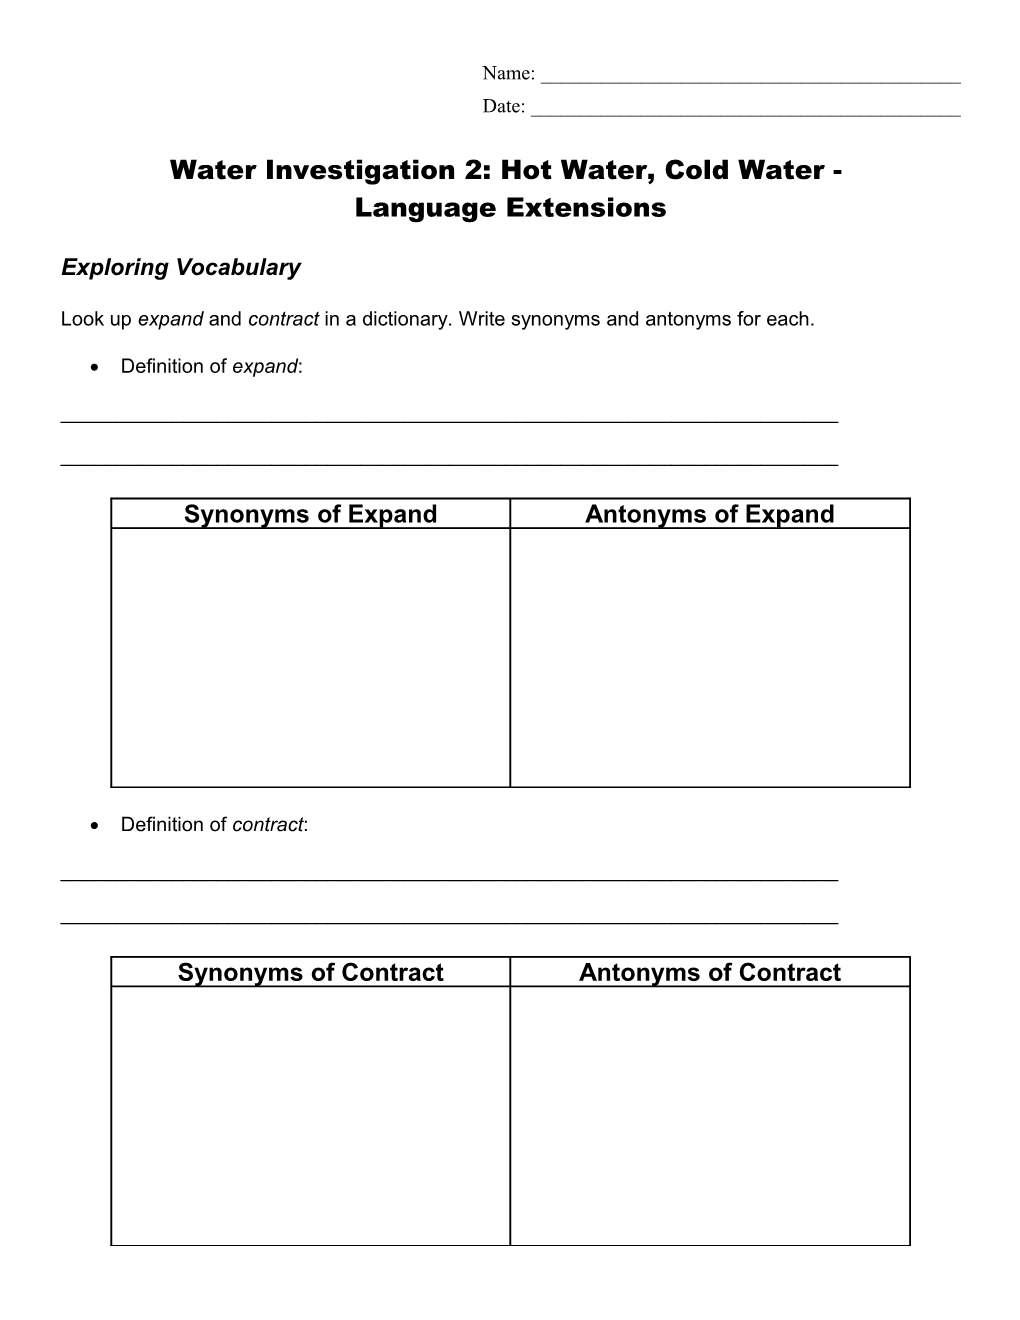 Water Investigation 1: Water Observations - Language Extensions